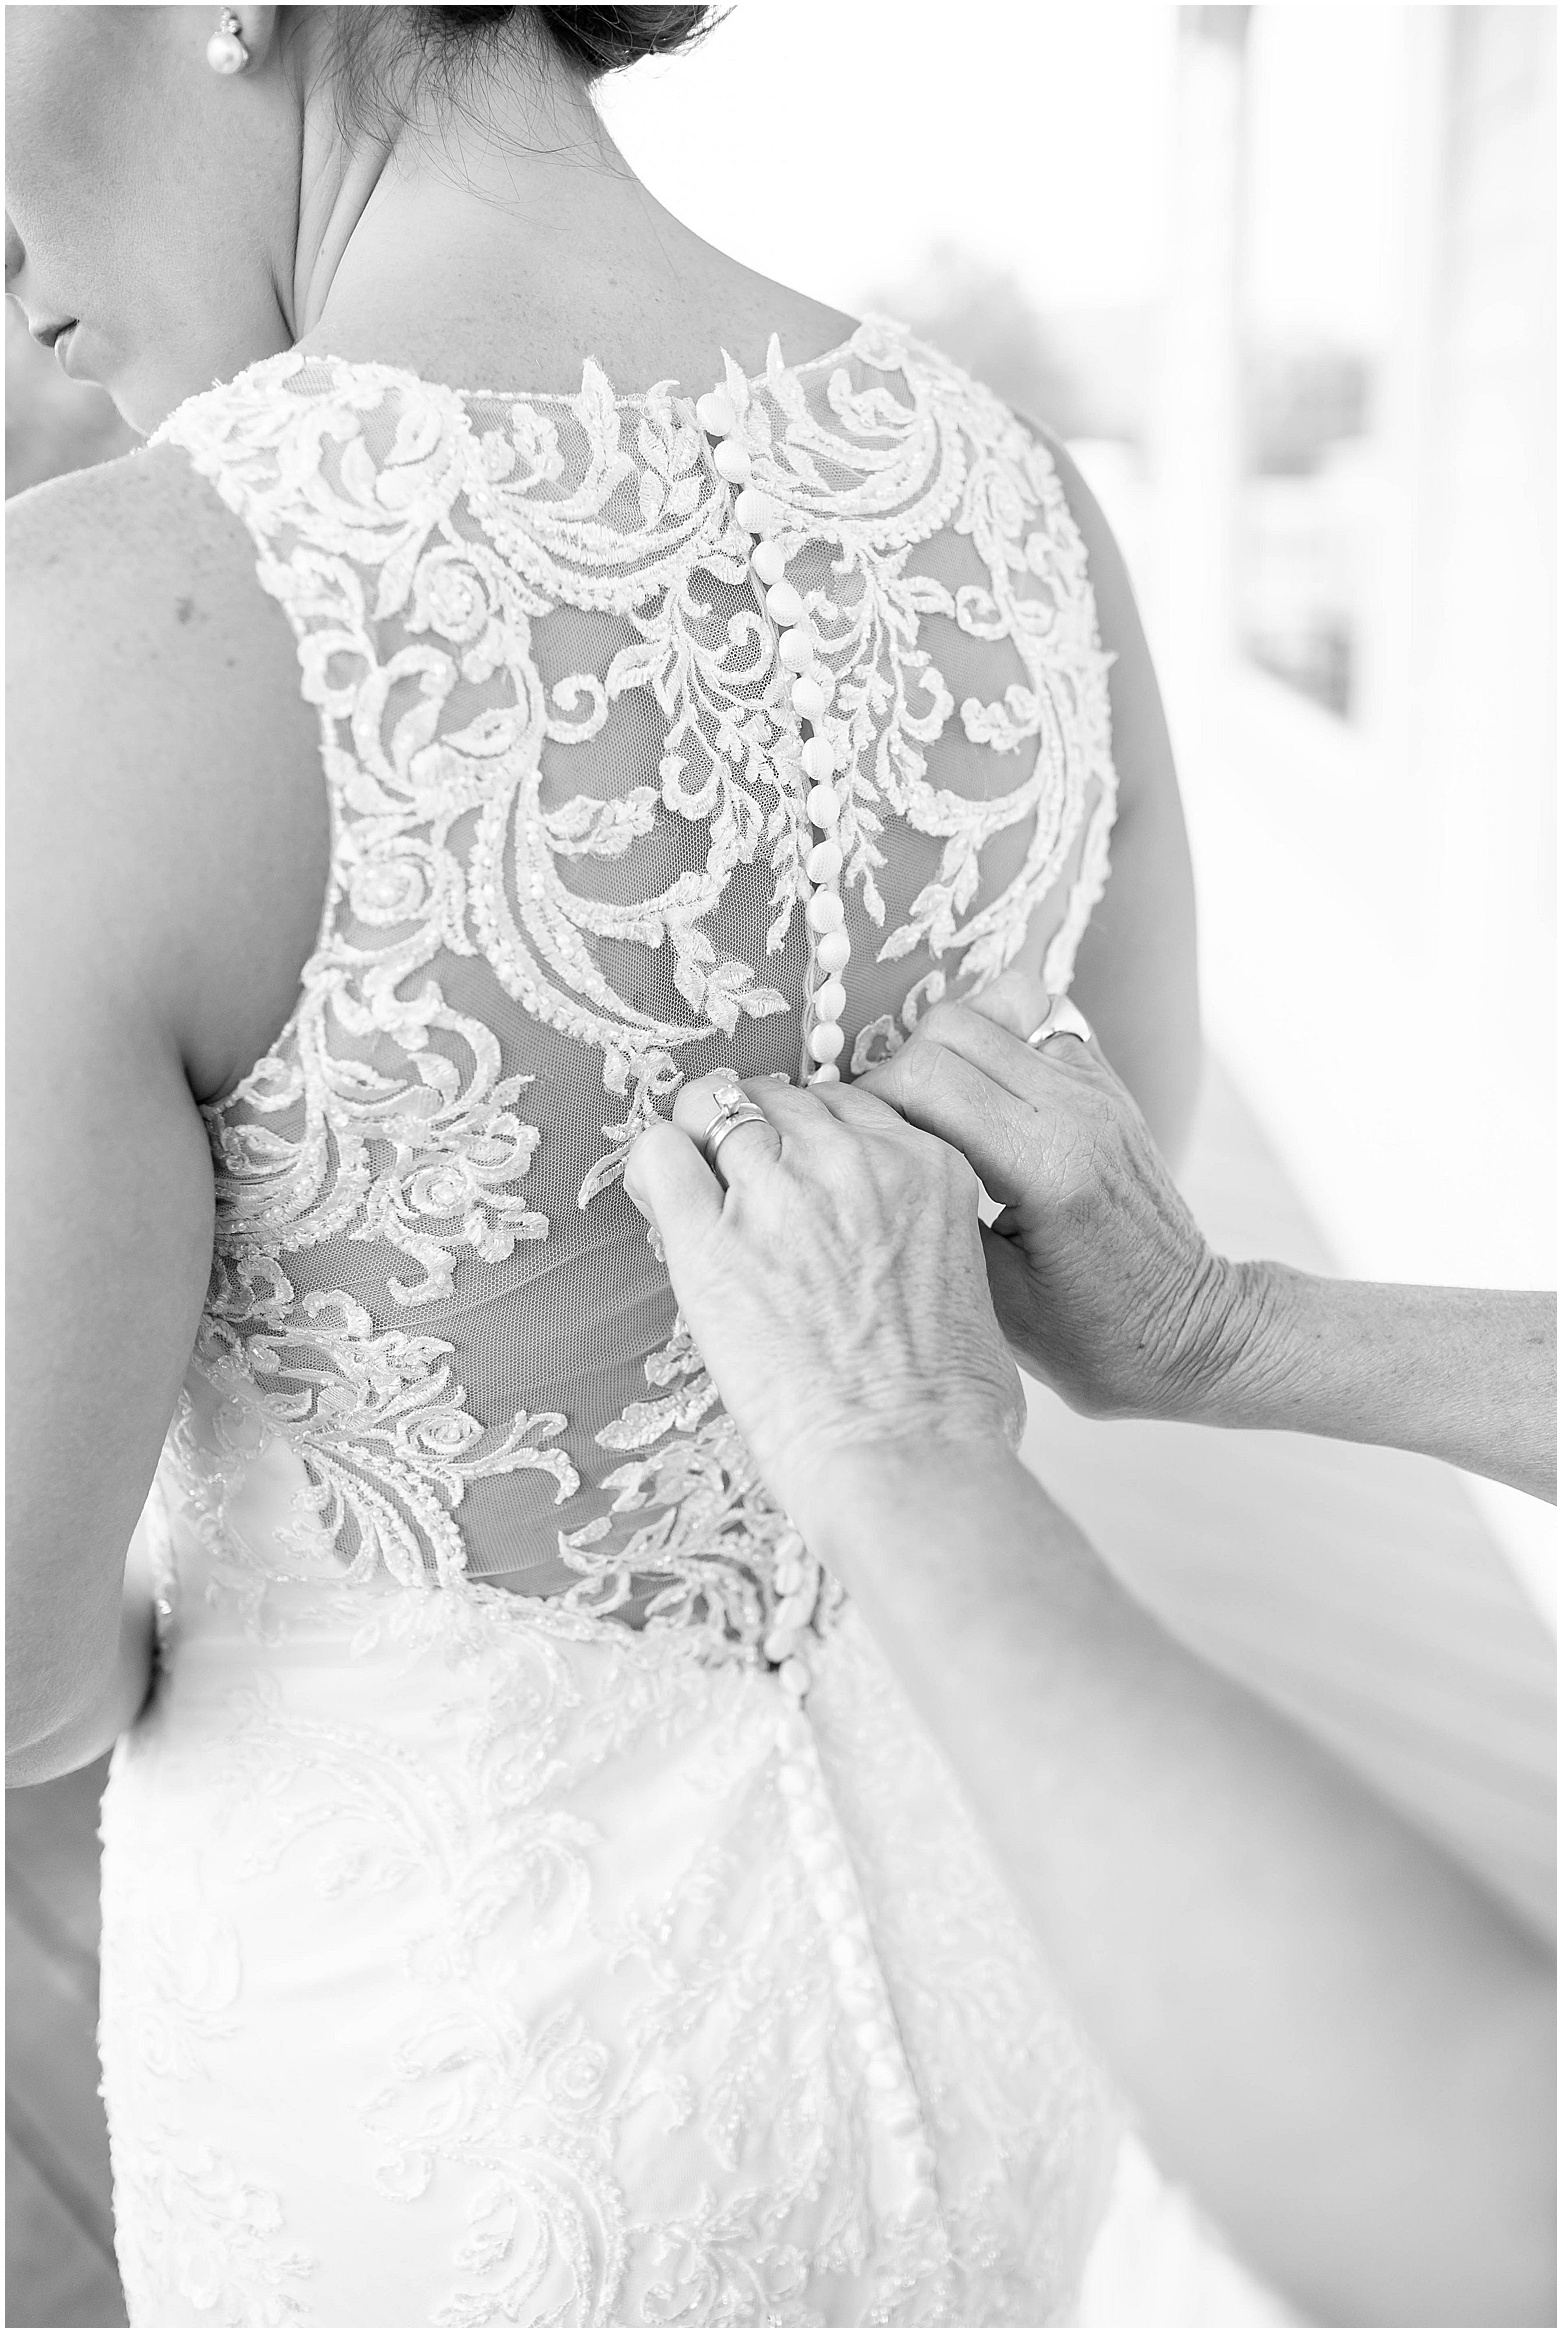 View More: http://hopetaylorphotographyphotos.pass.us/hunter-and-andy-wedding